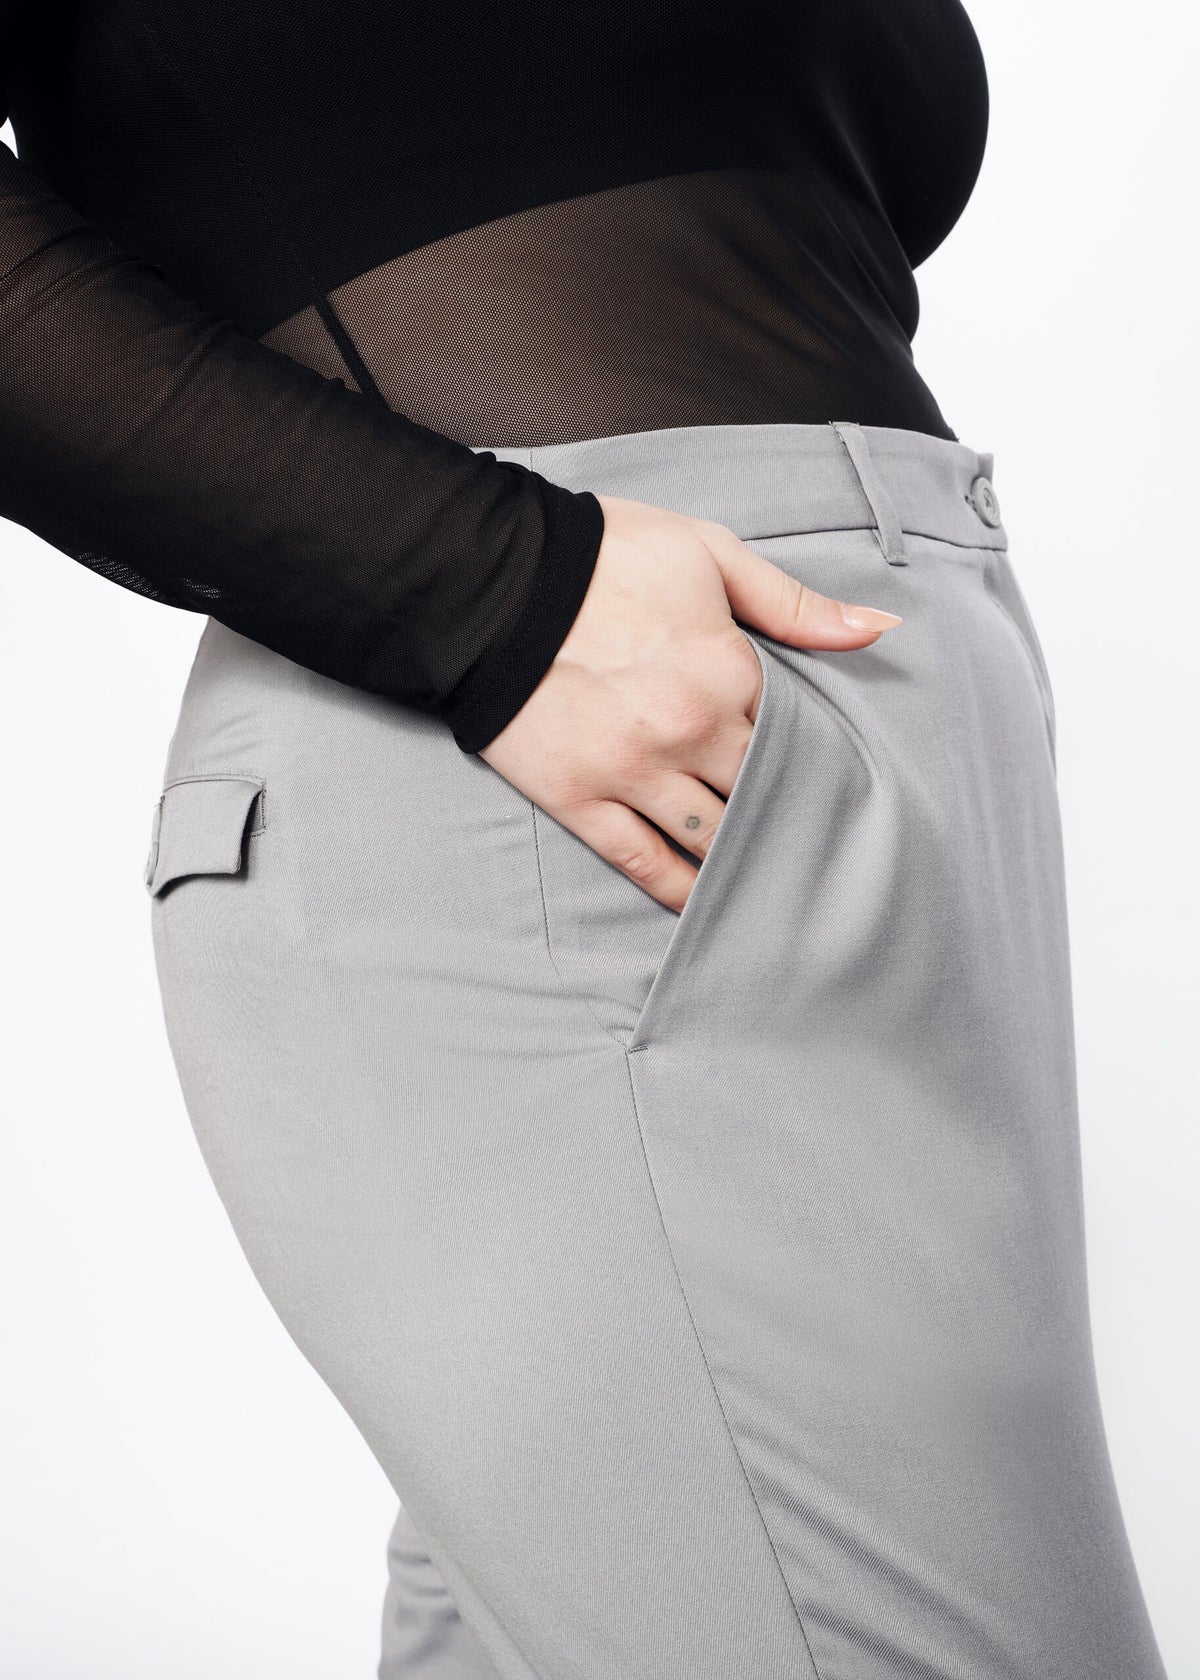 The Empower Trouser